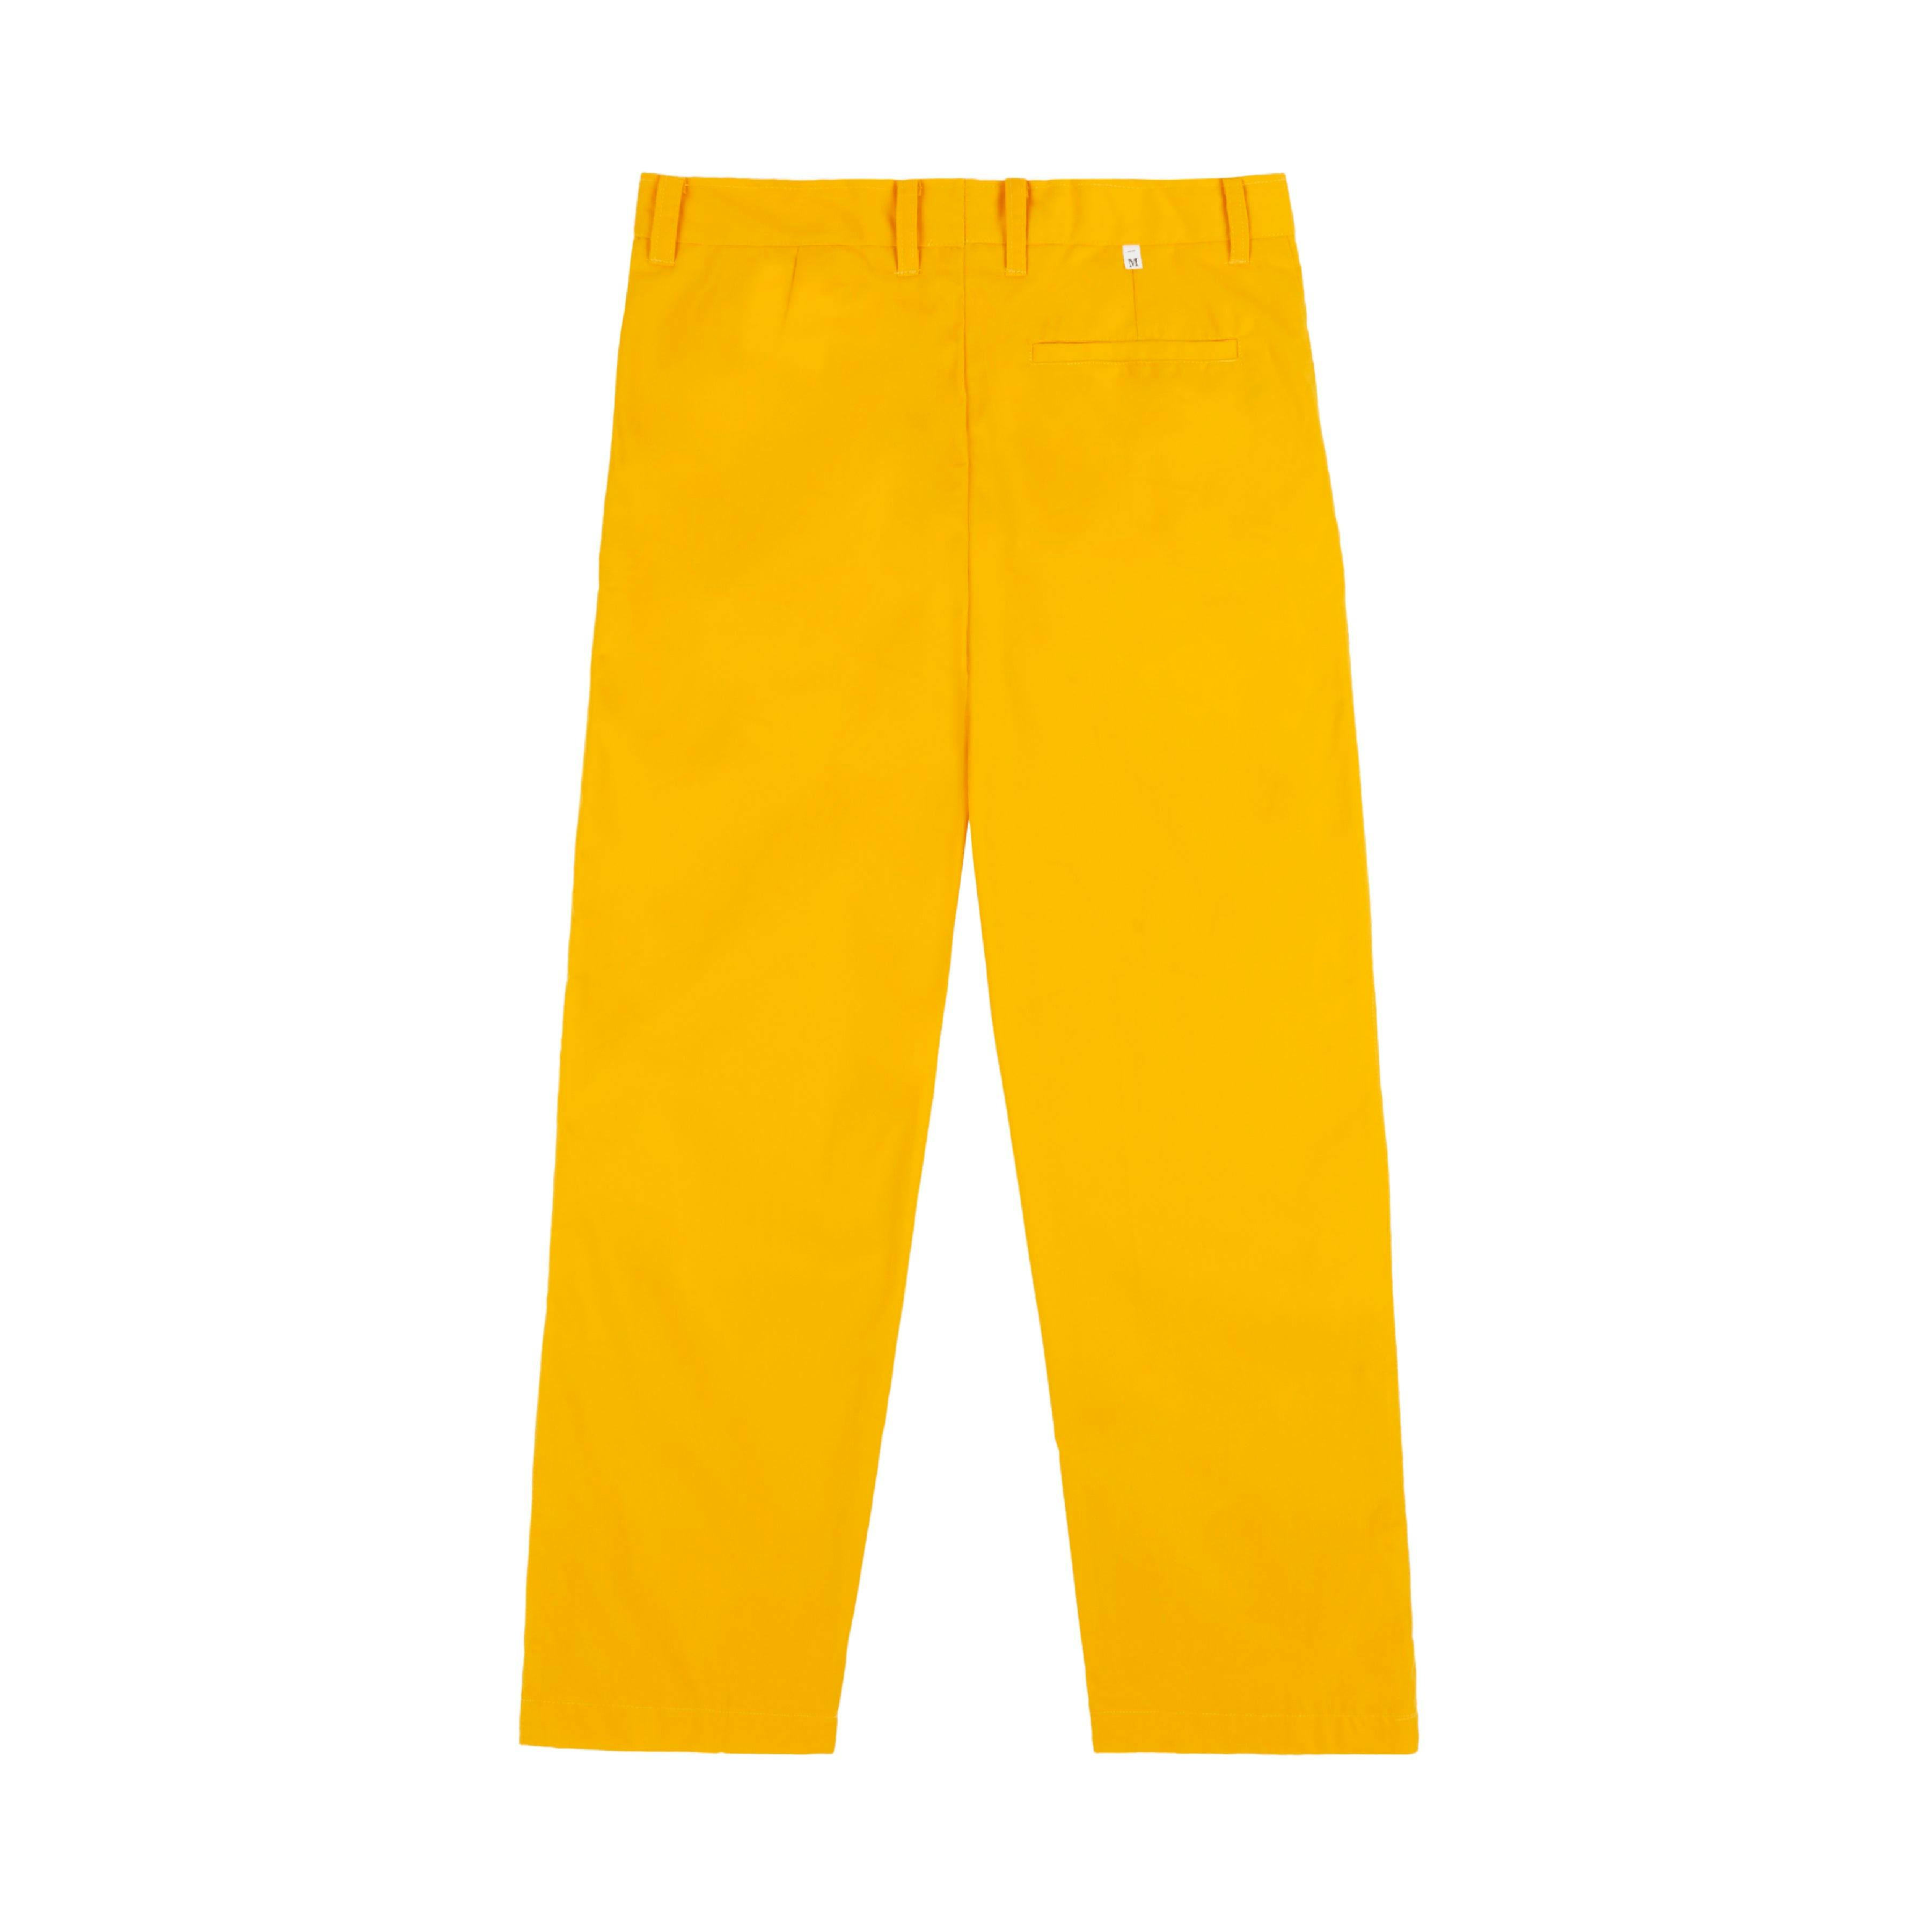 a yellow work pant = 2 of 8